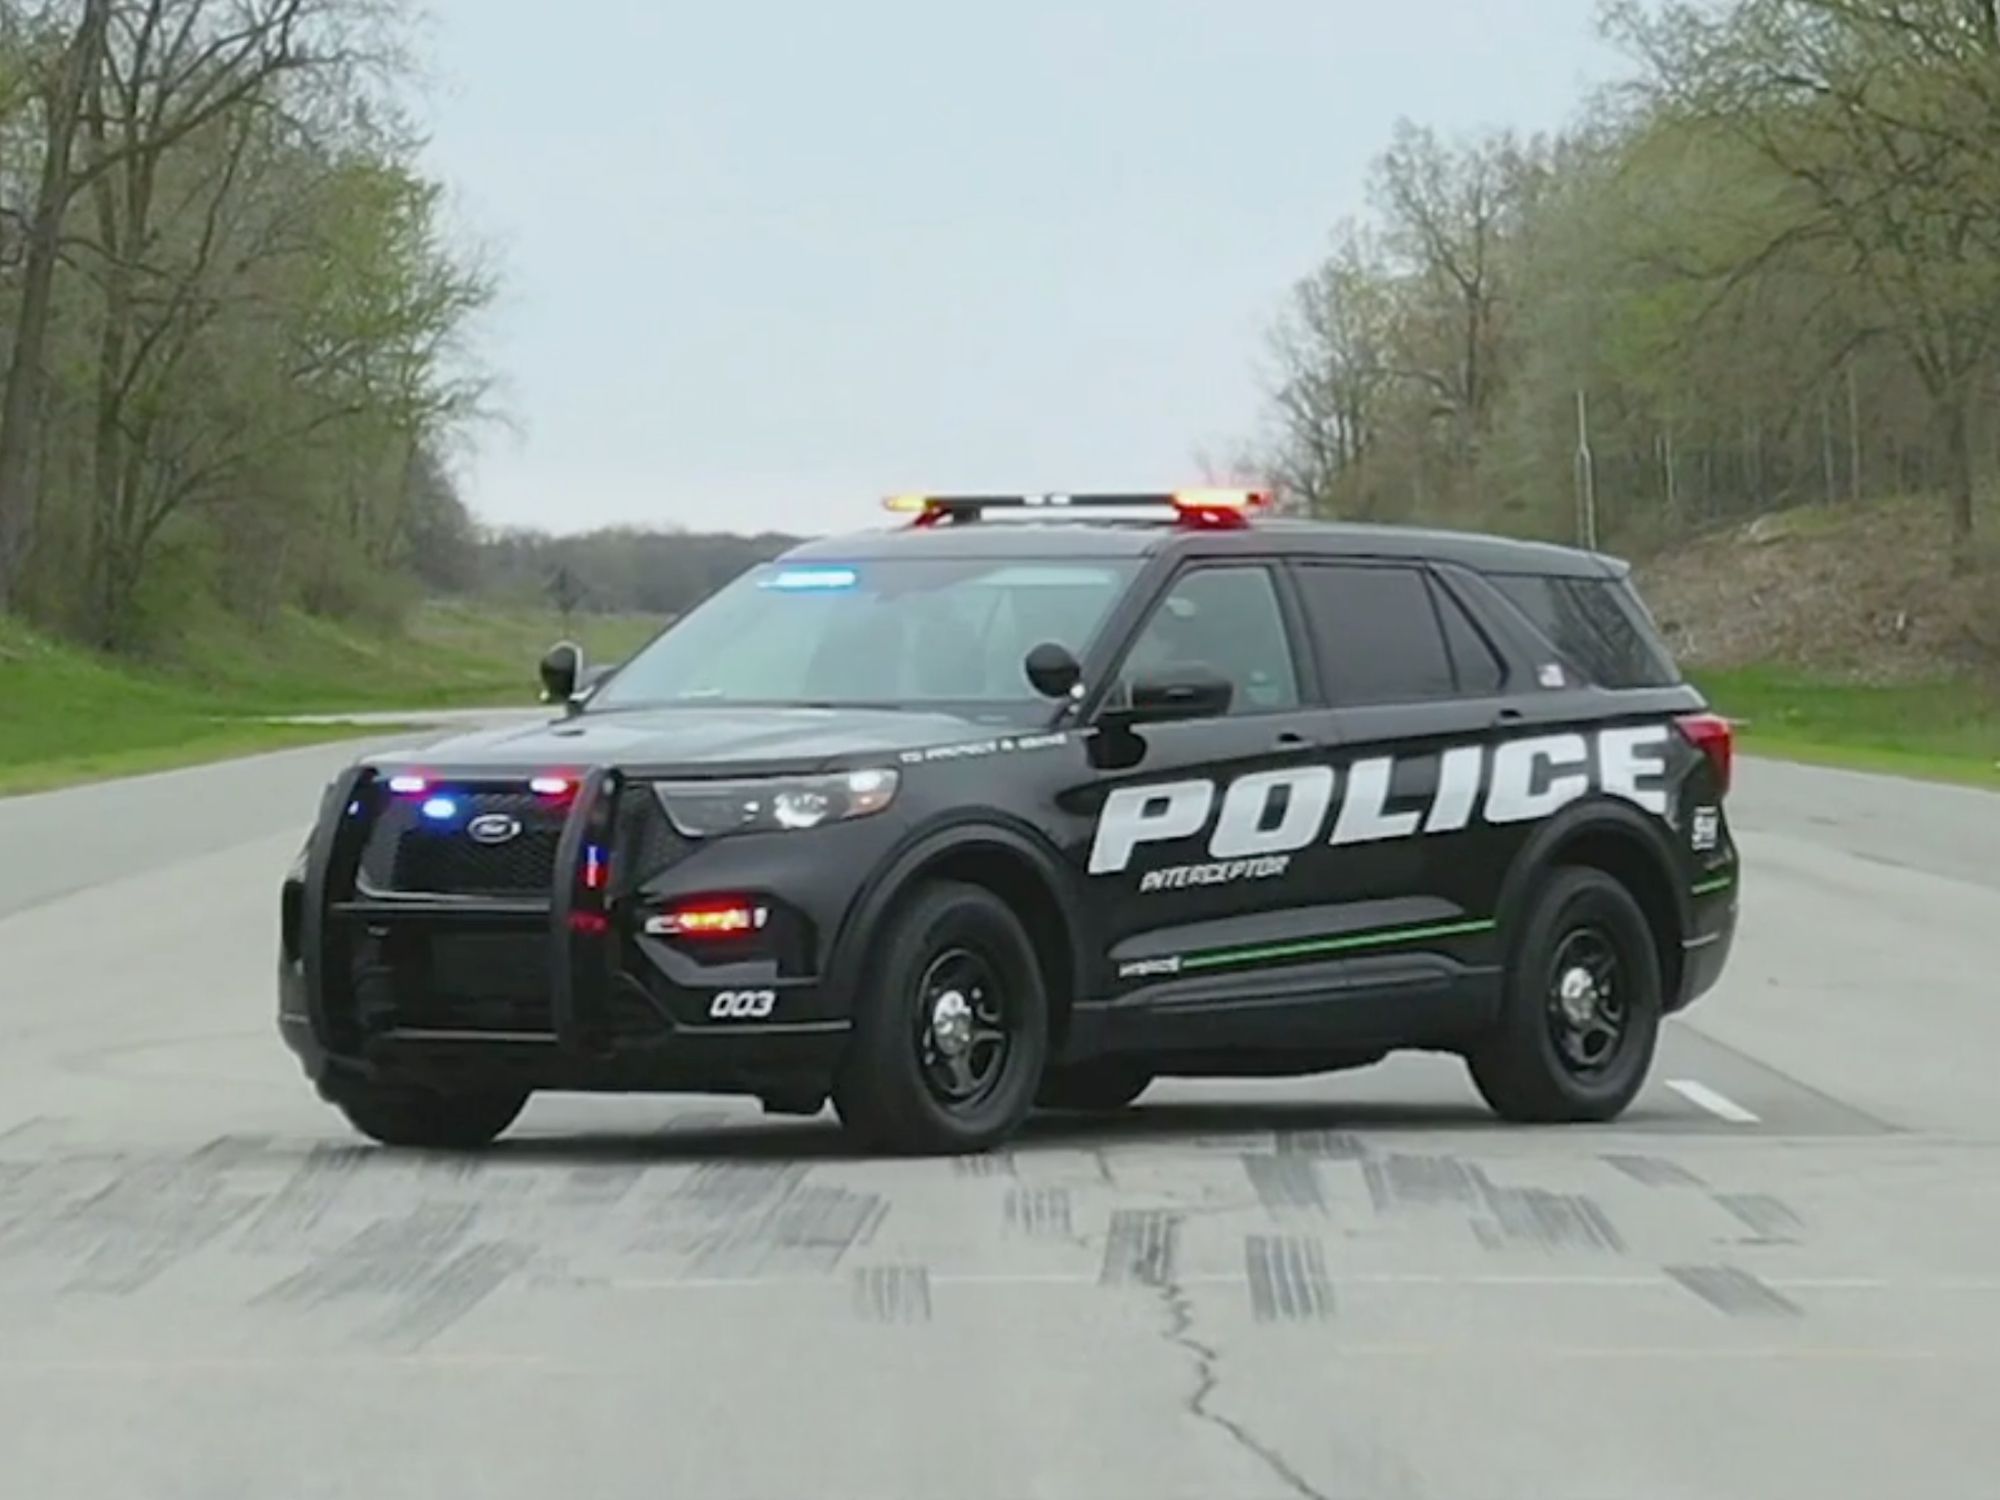 New Jersey Police Department Adds Four 2020 Ford Police Utility Interceptor Hybrid SUVs